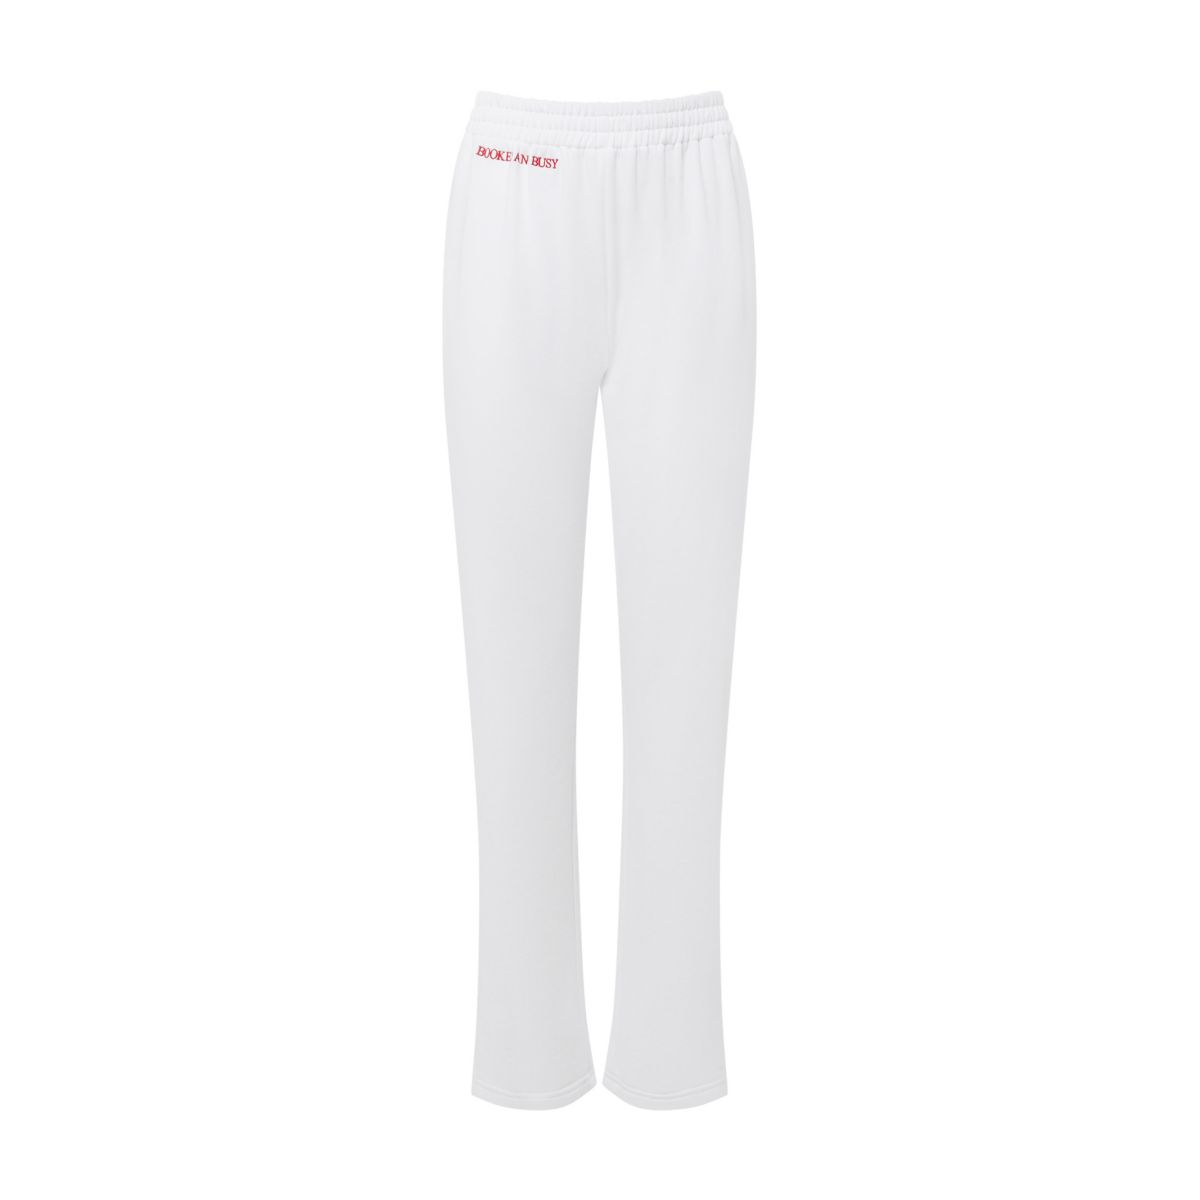 Booked & Busy Joggers In White | Wolf & Badger (US)